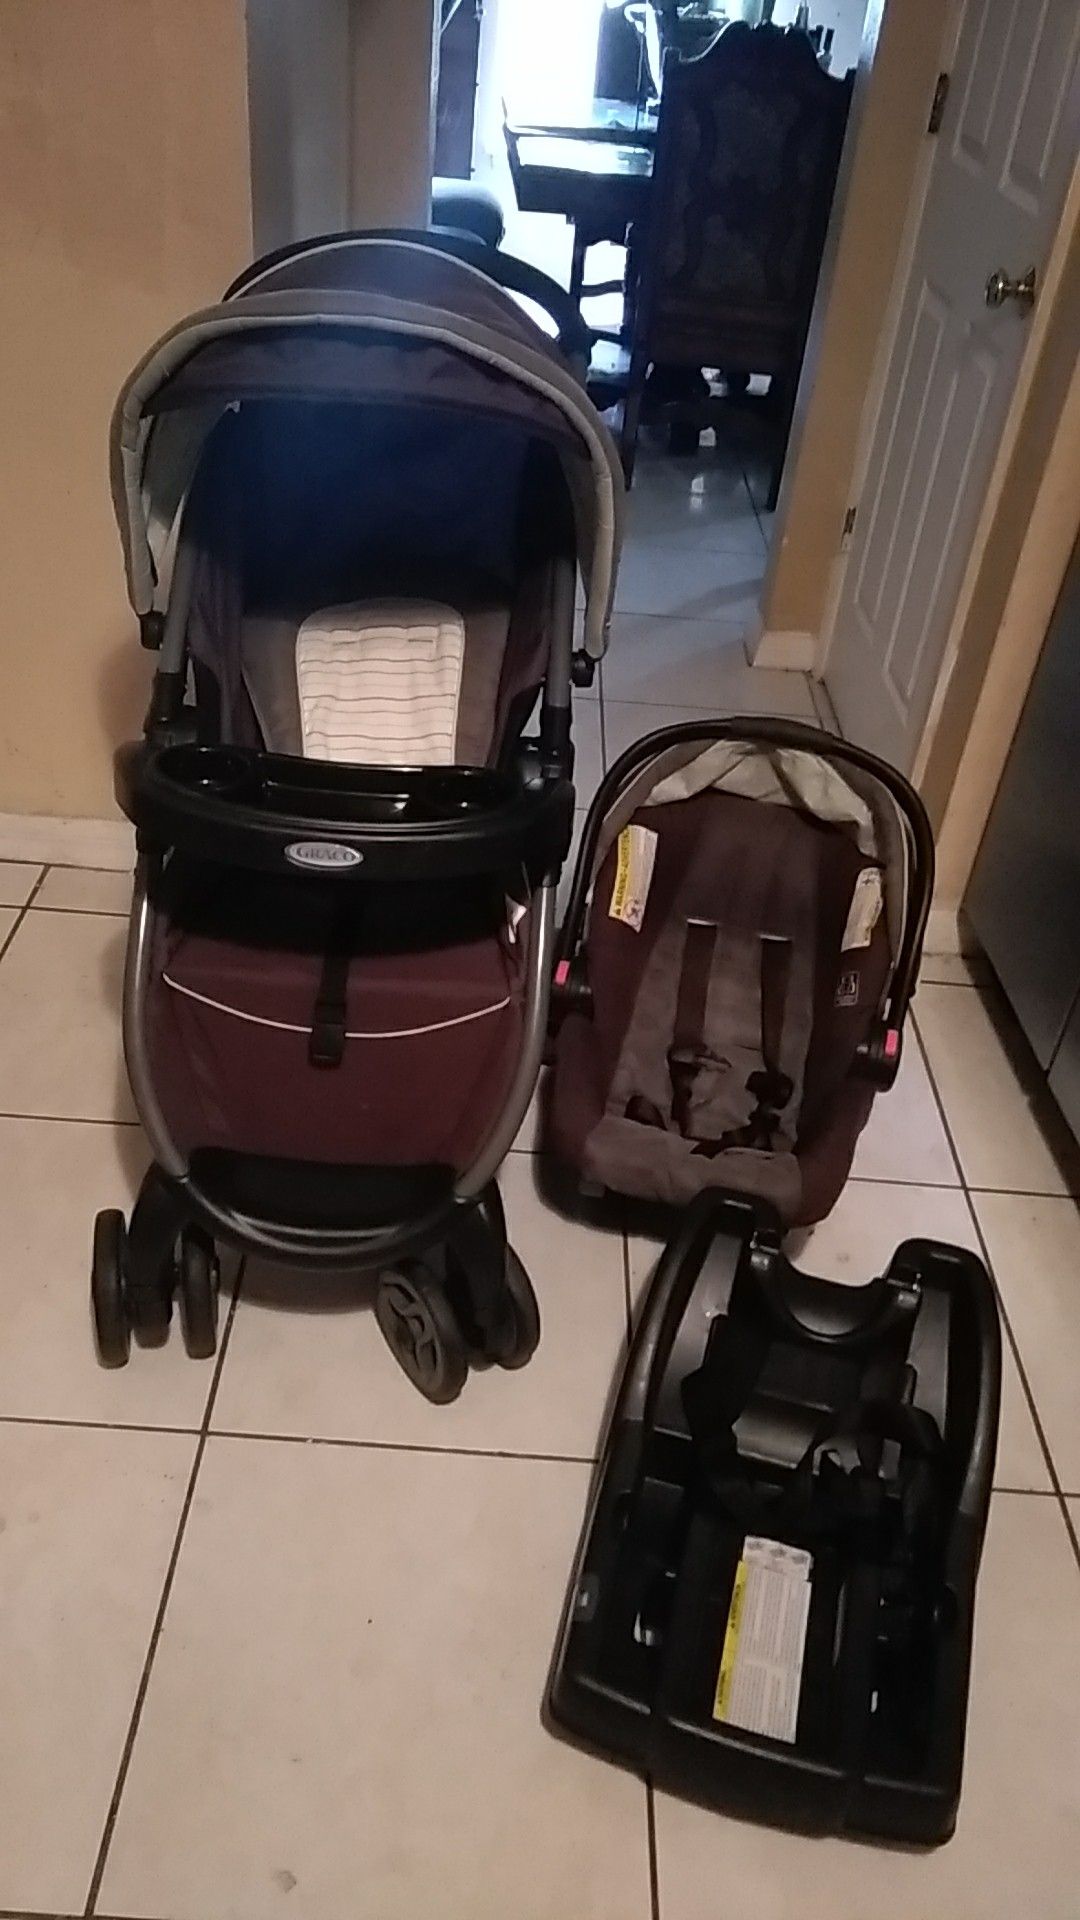 Graco Baby Car Seat, Stroller, and Base